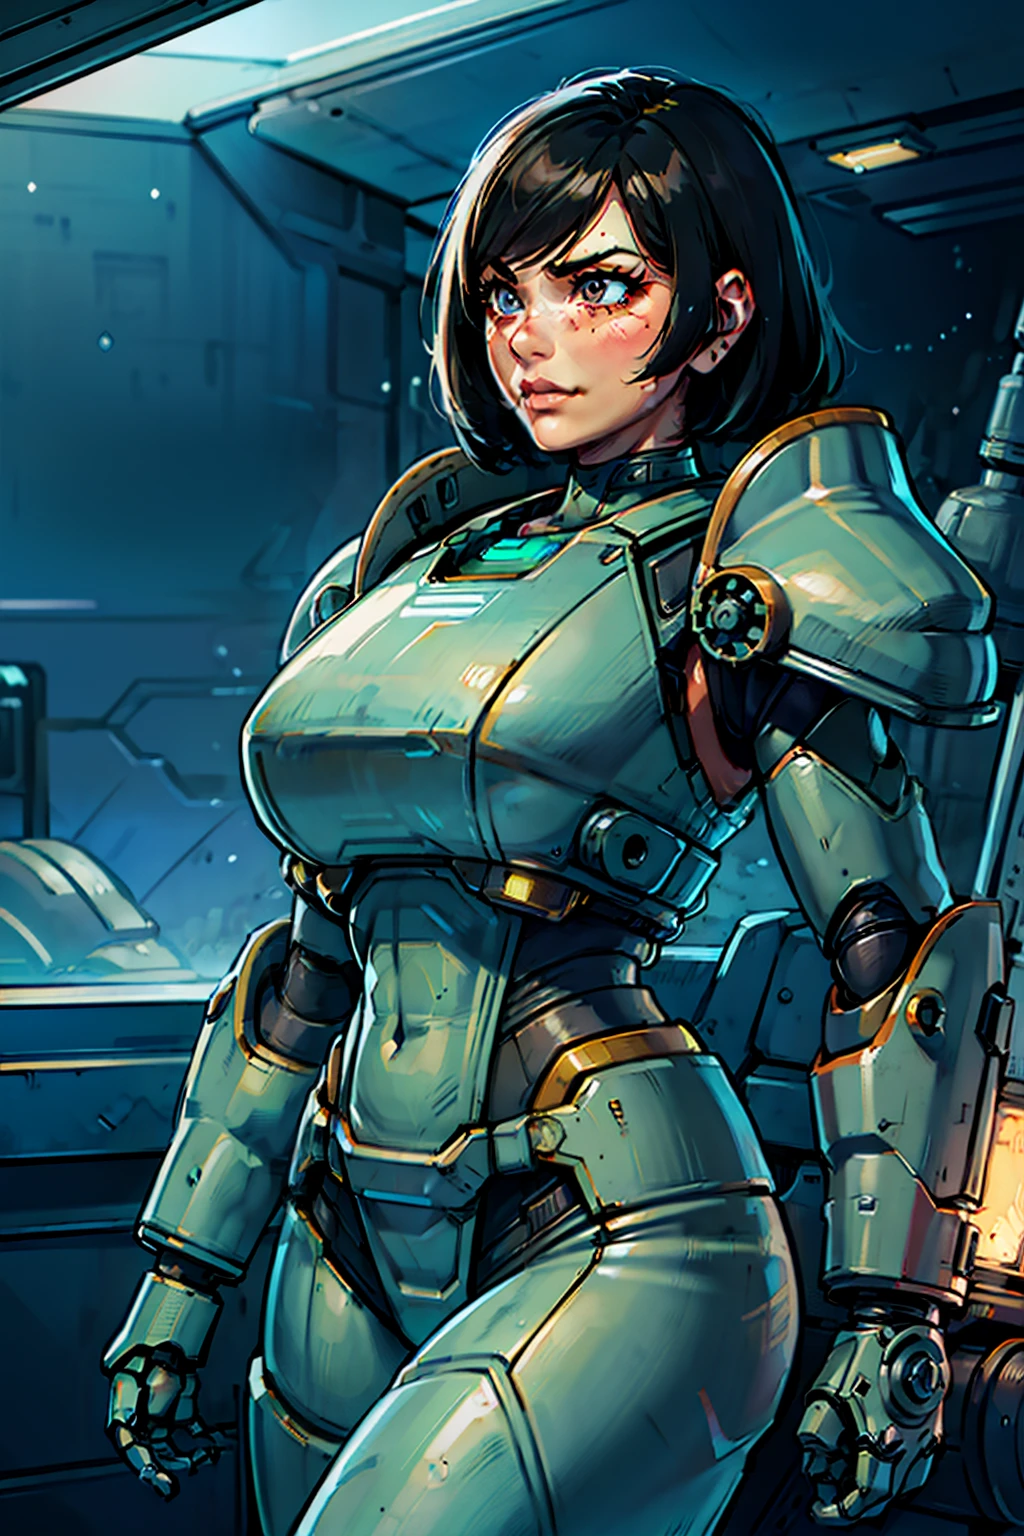 sexy, professional artwork, detailed eyes, beautiful eyes, beautiful face, flawless face, gorgeous face, smooth features, blush, thick thighs, beautifully detailed background, sci-fi, science fiction, future, neon lights, space ship interior, space ship, space, space visible through window, outer space, mechanical background, power armor, power suit, armored, armor, cyberpunk, cyborg, cyborg woman, cybernetics, cybernetic, robot, robotic arm, robotic leg, smiling, short hair, black hair, black armor, metroid, metroid prime, heavy armor, mecha suit, retro armor, bare metal armor, rust, dark armor suit, armor suit, metal breastplate, fully armored, full plate, t-51b, fallout power armor, fully covered